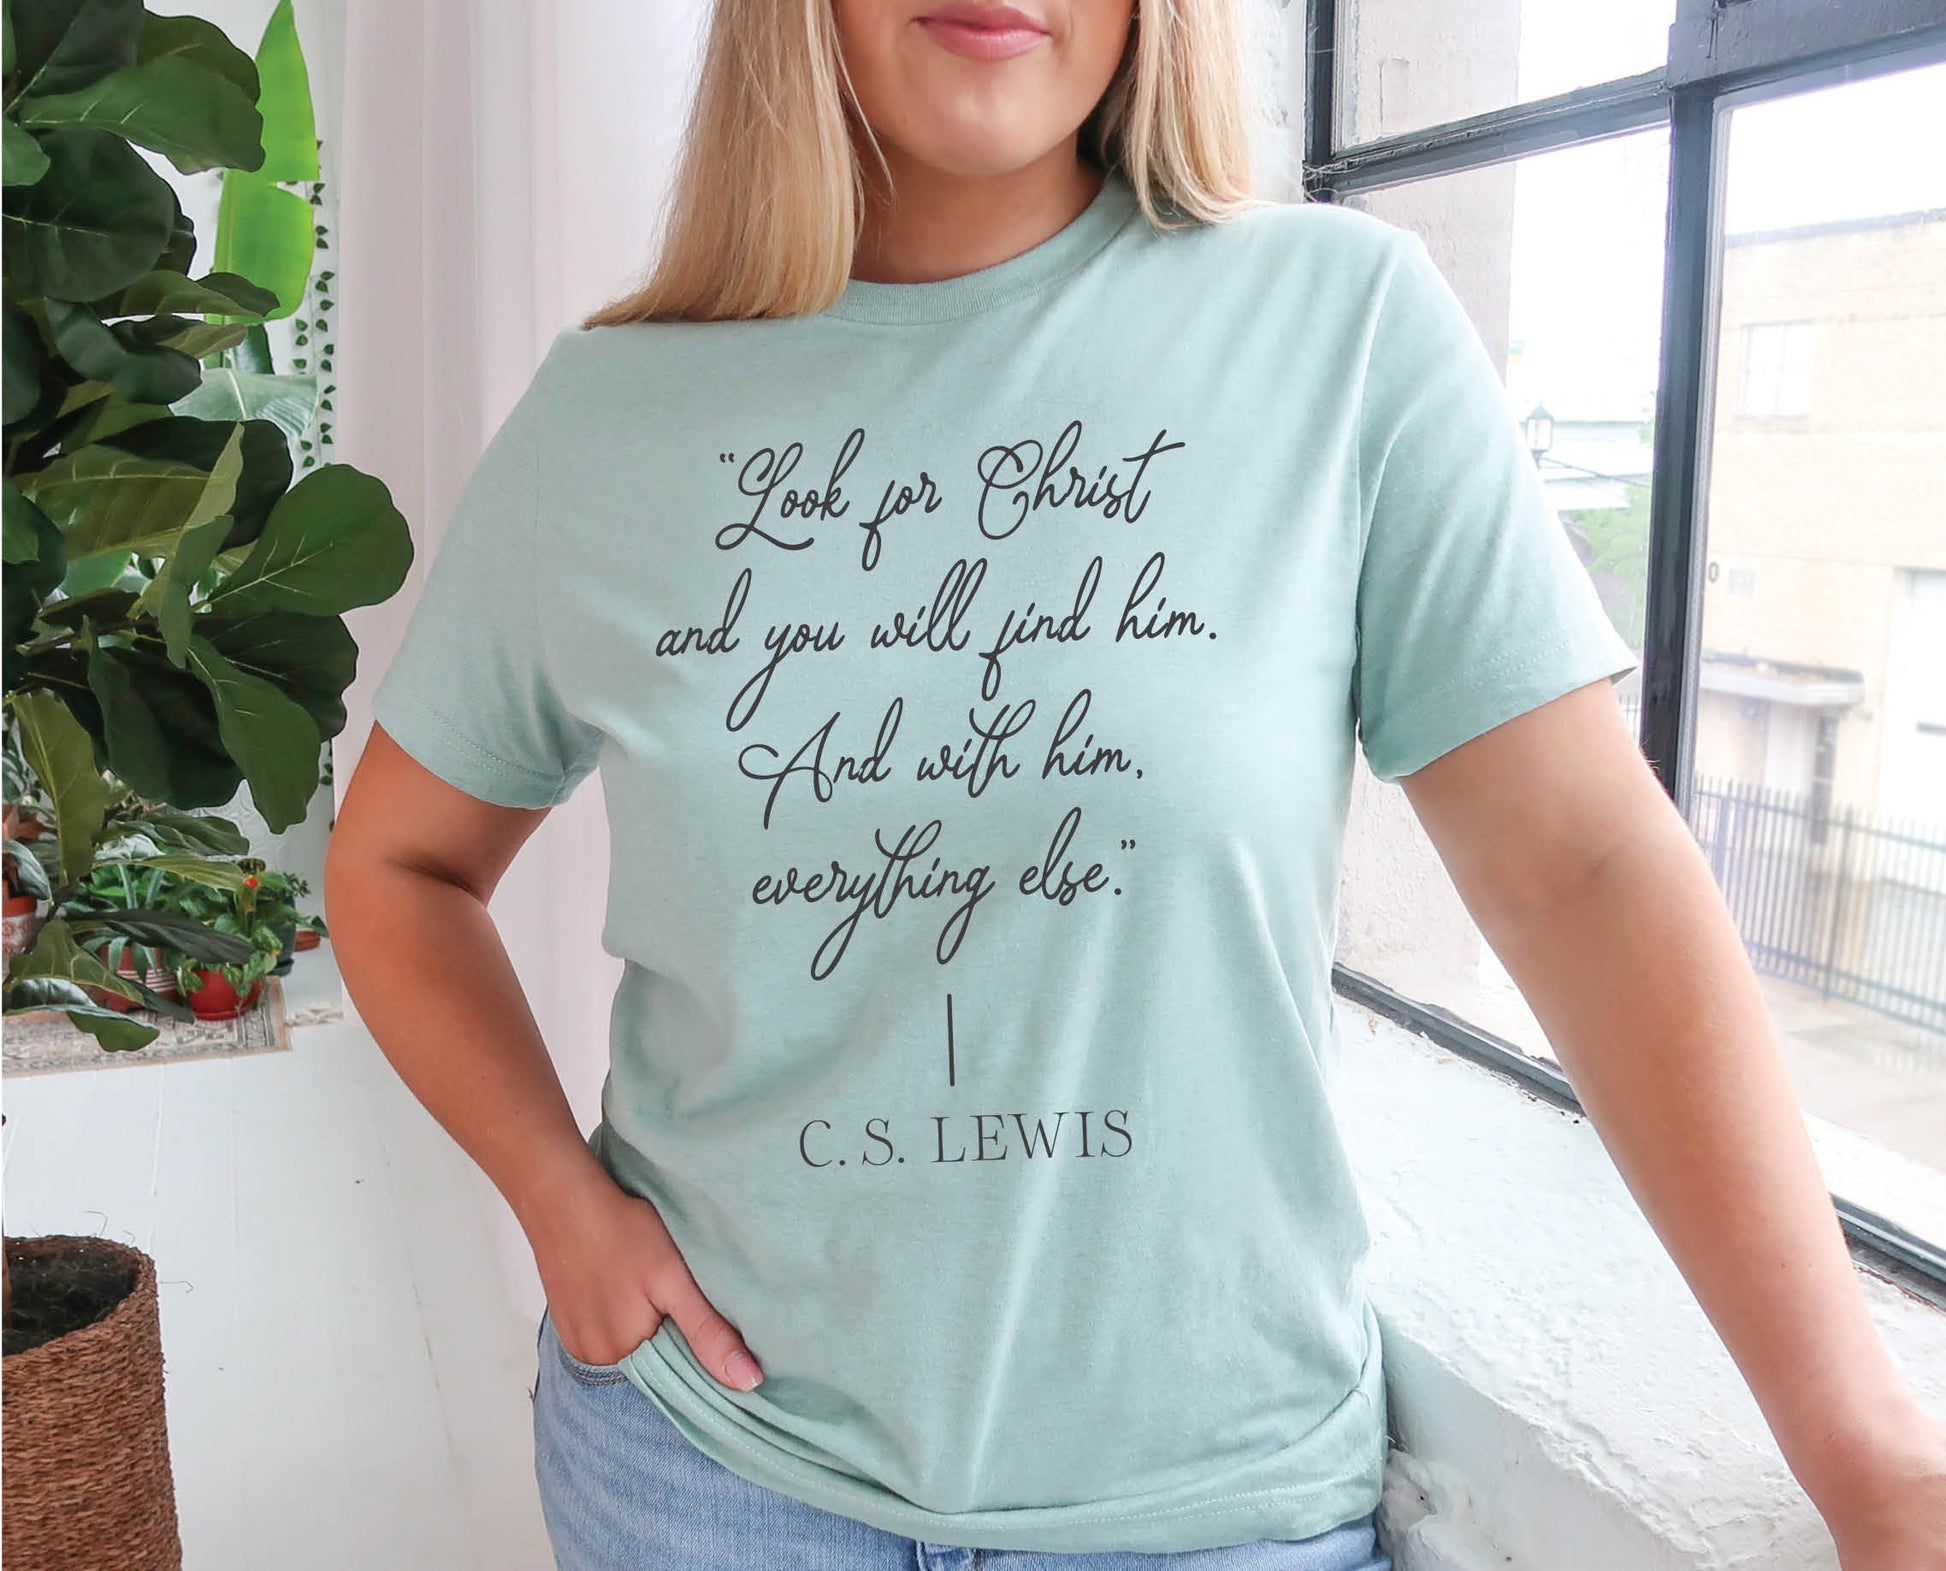 Soft quality heather dusty blue t-shirt with British writer Narnia author C.S. Lewis quote "Look for Christ and you will find him. And with him, everything else."  printed in black vintage script - Christian aesthetic unisex tee shirt design for women